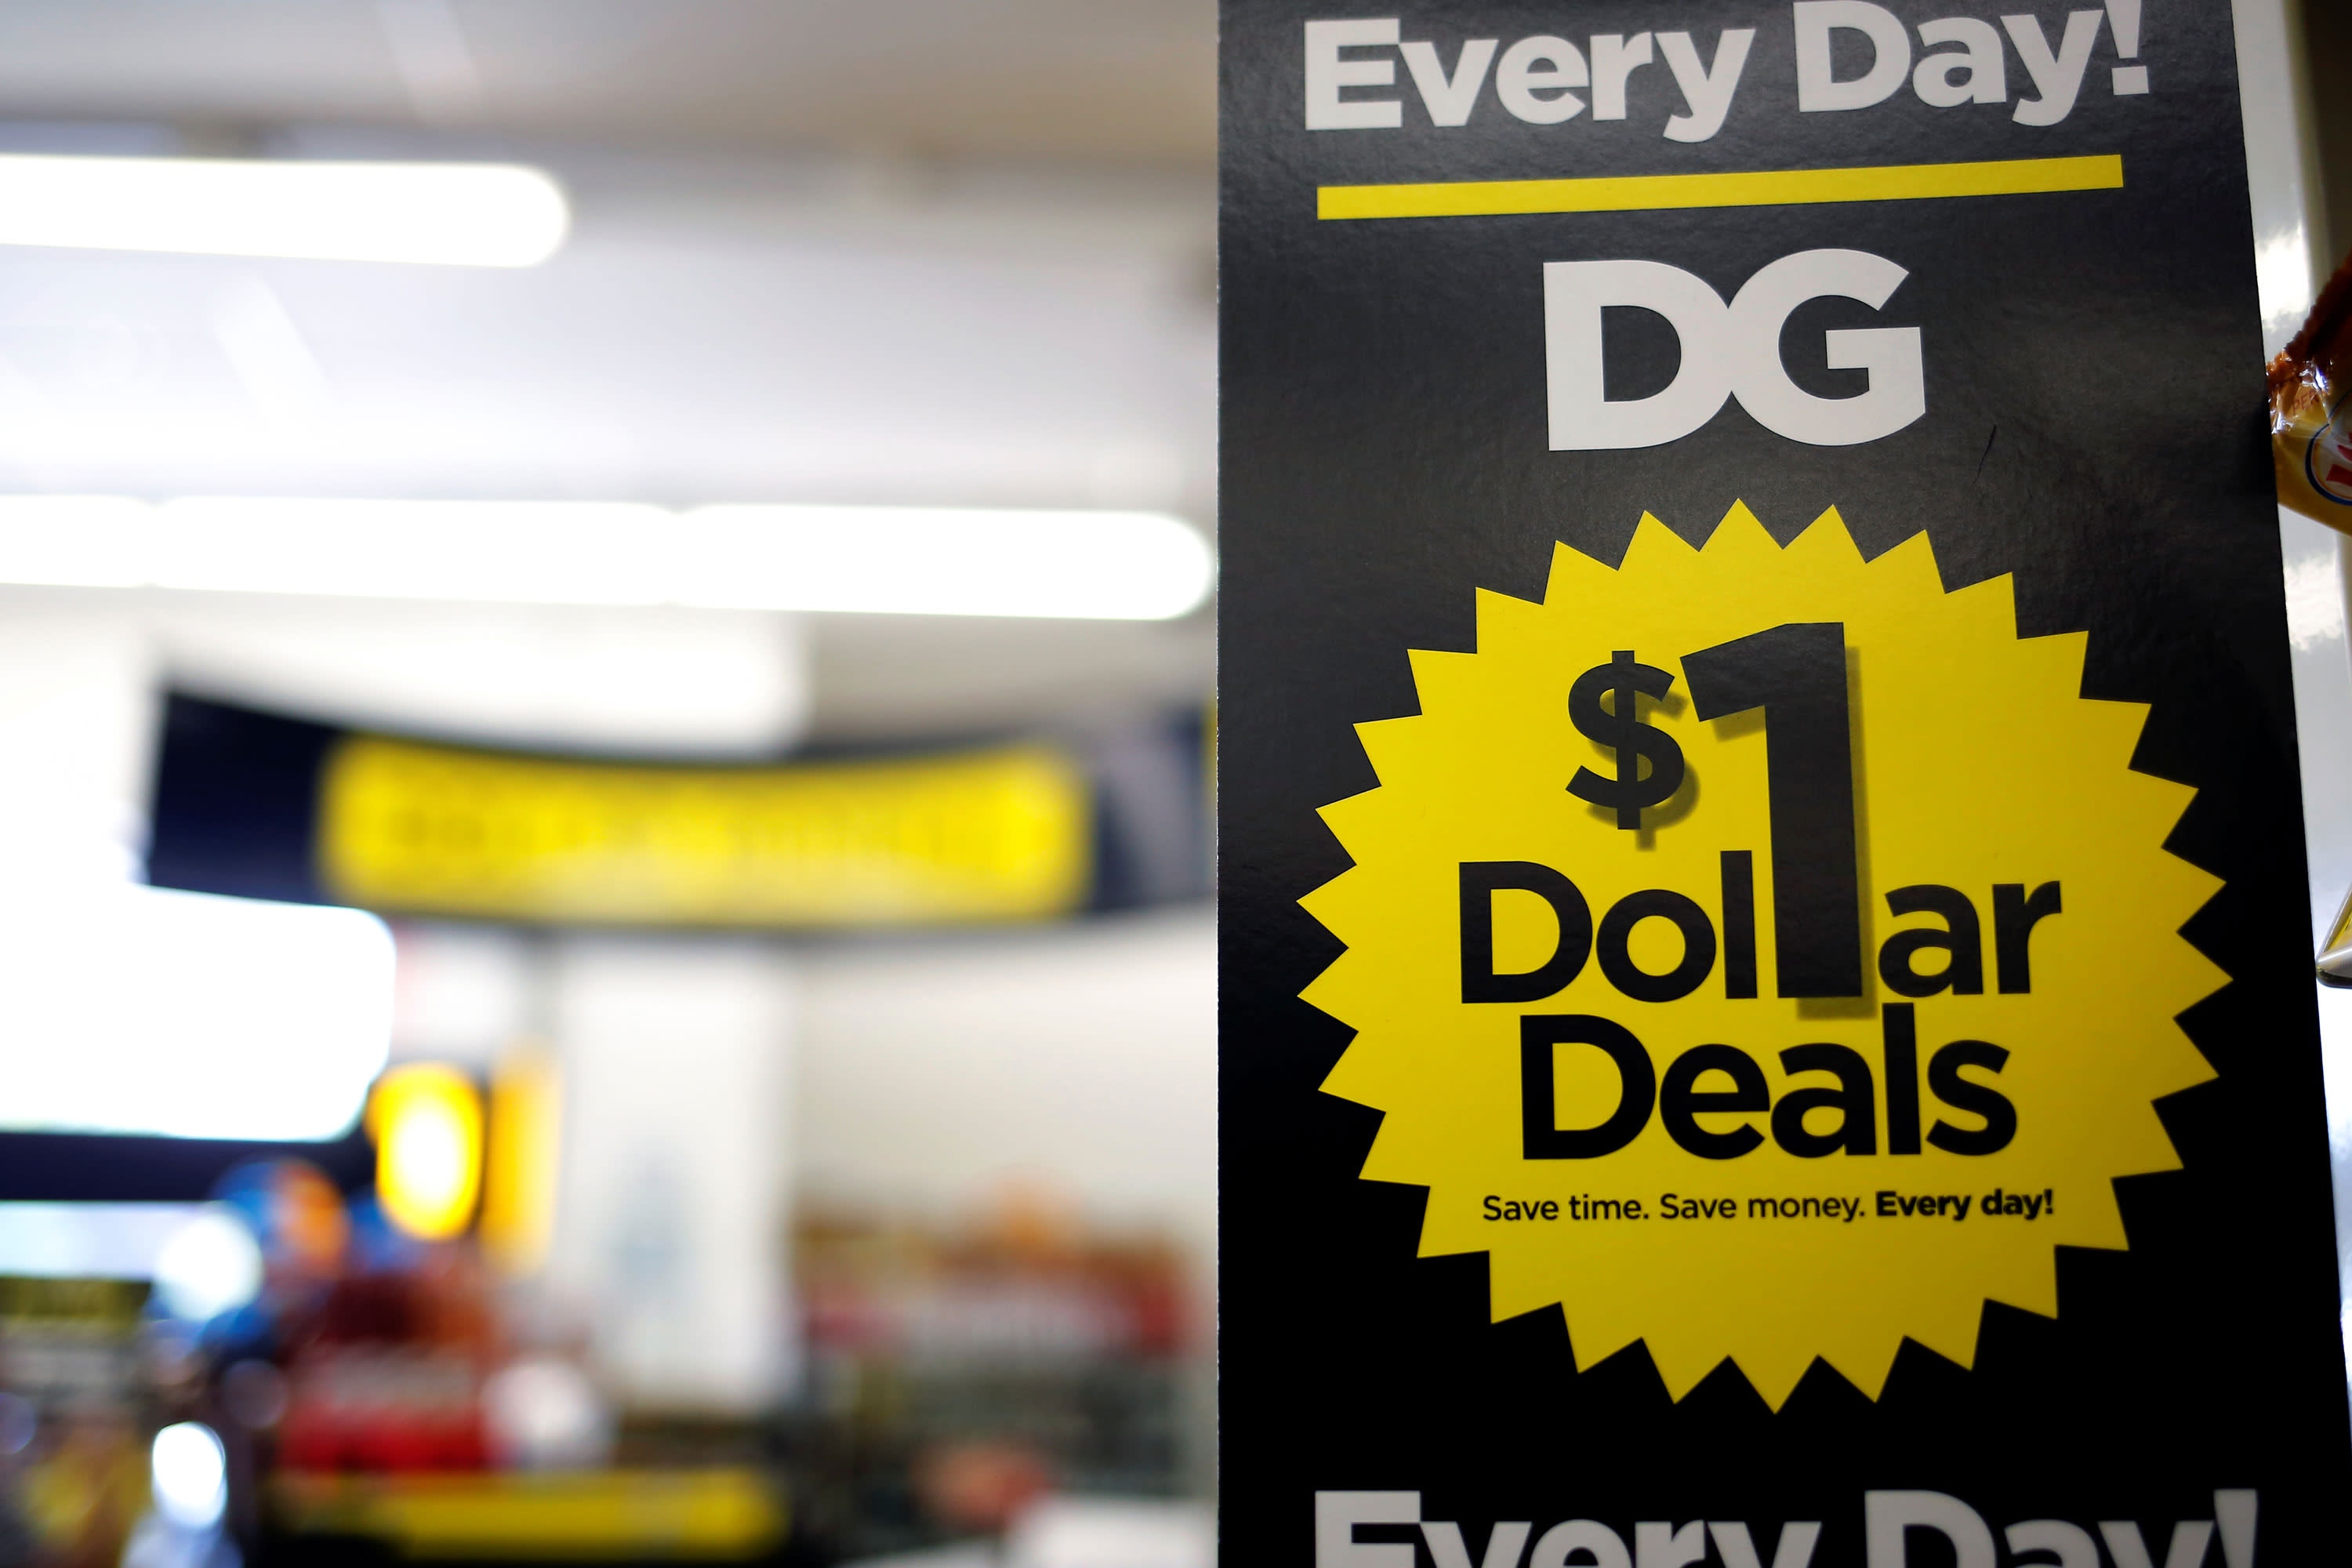 Dollar General will build larger stores, expand the Popshelf brand